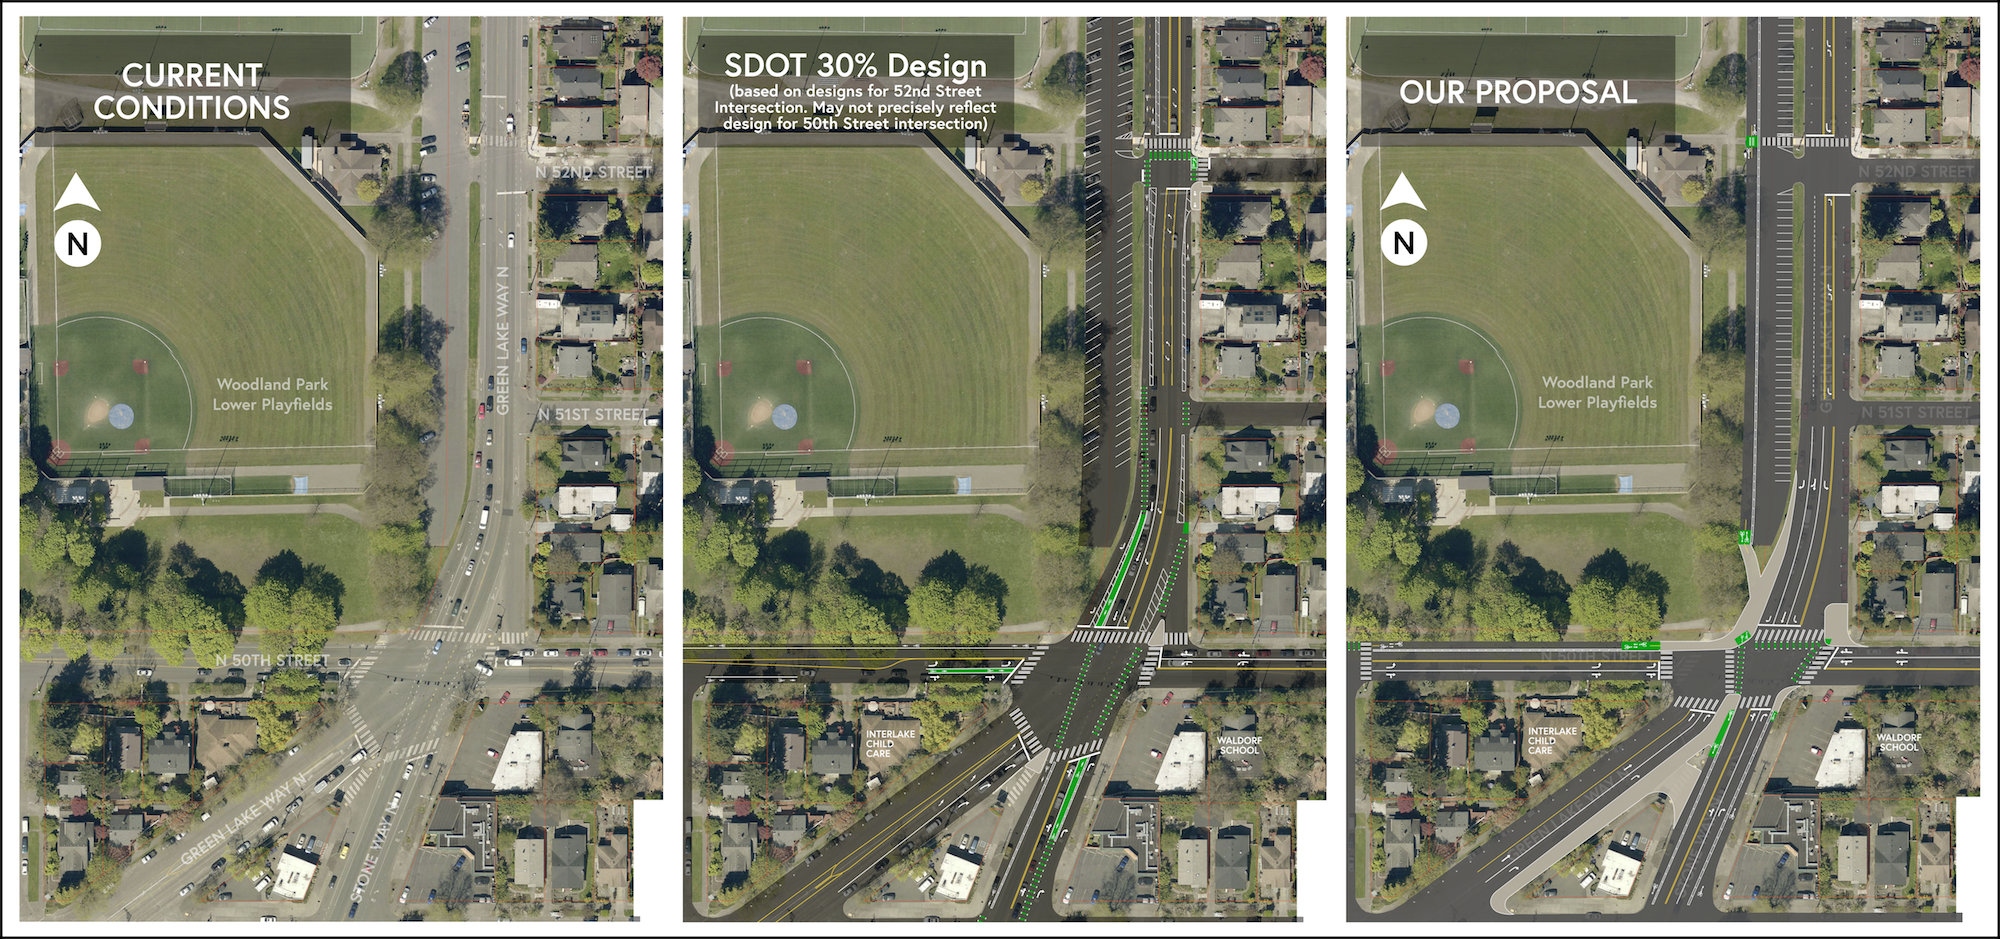 Comparison of existing conditions, SDOT proposal, and our proposal.